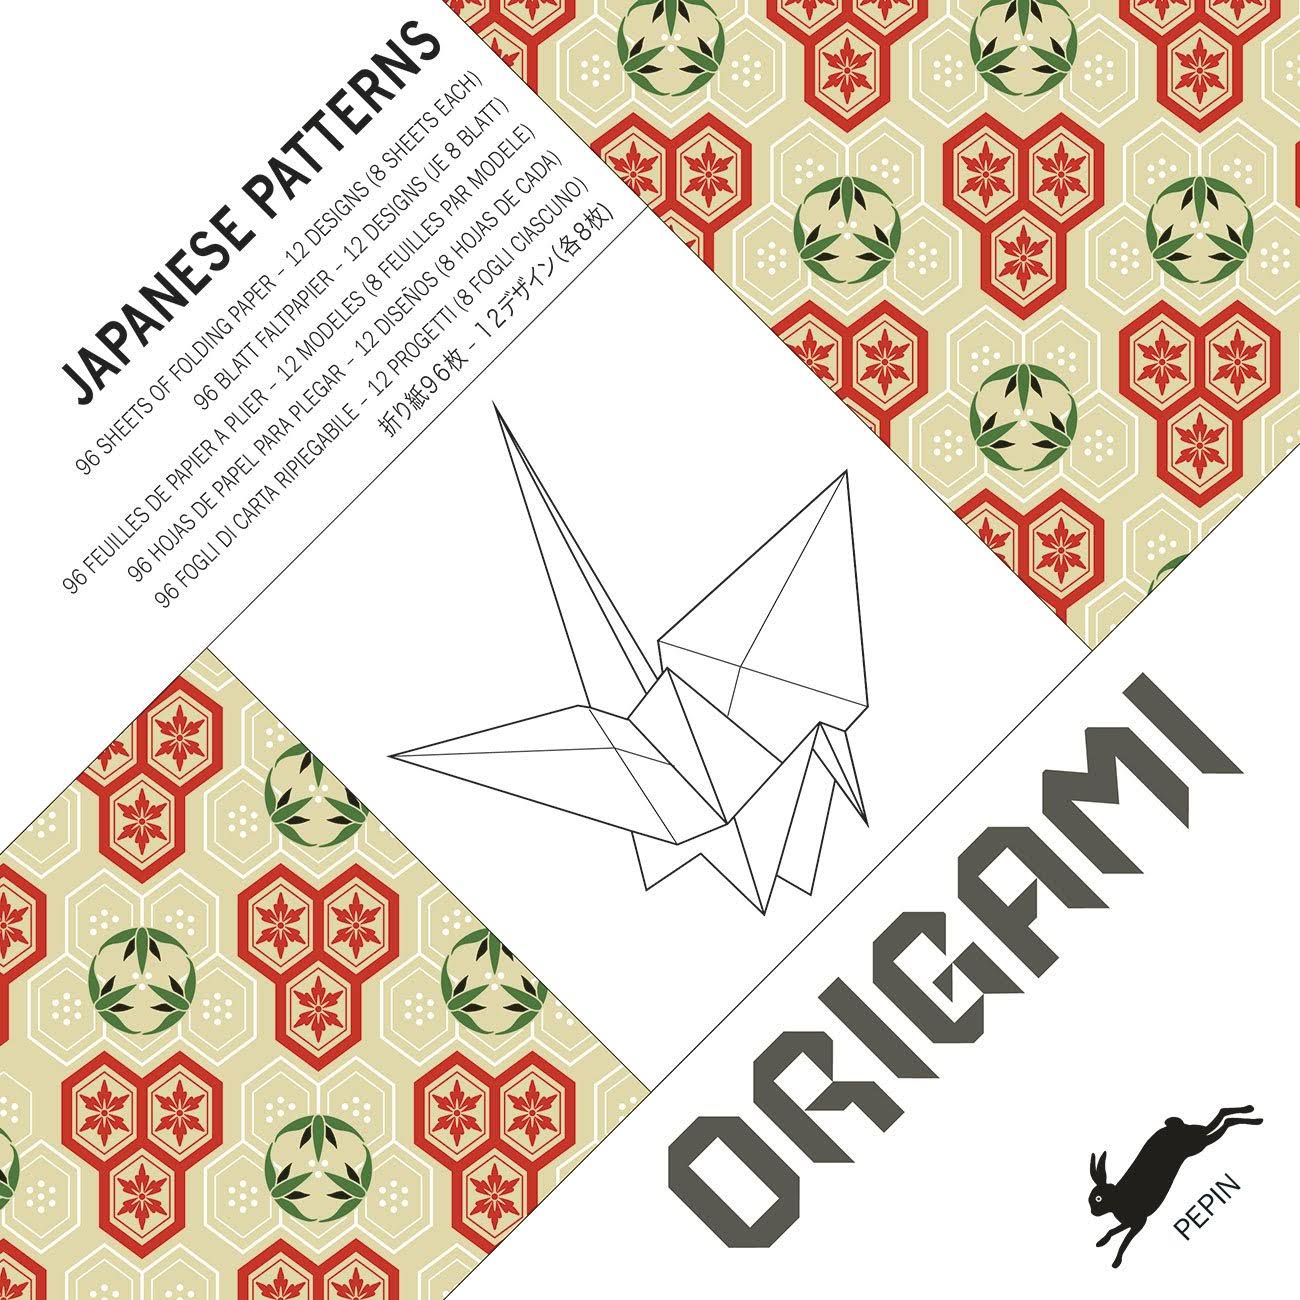 Origami Japanese Patterns: Origami Book [Book]